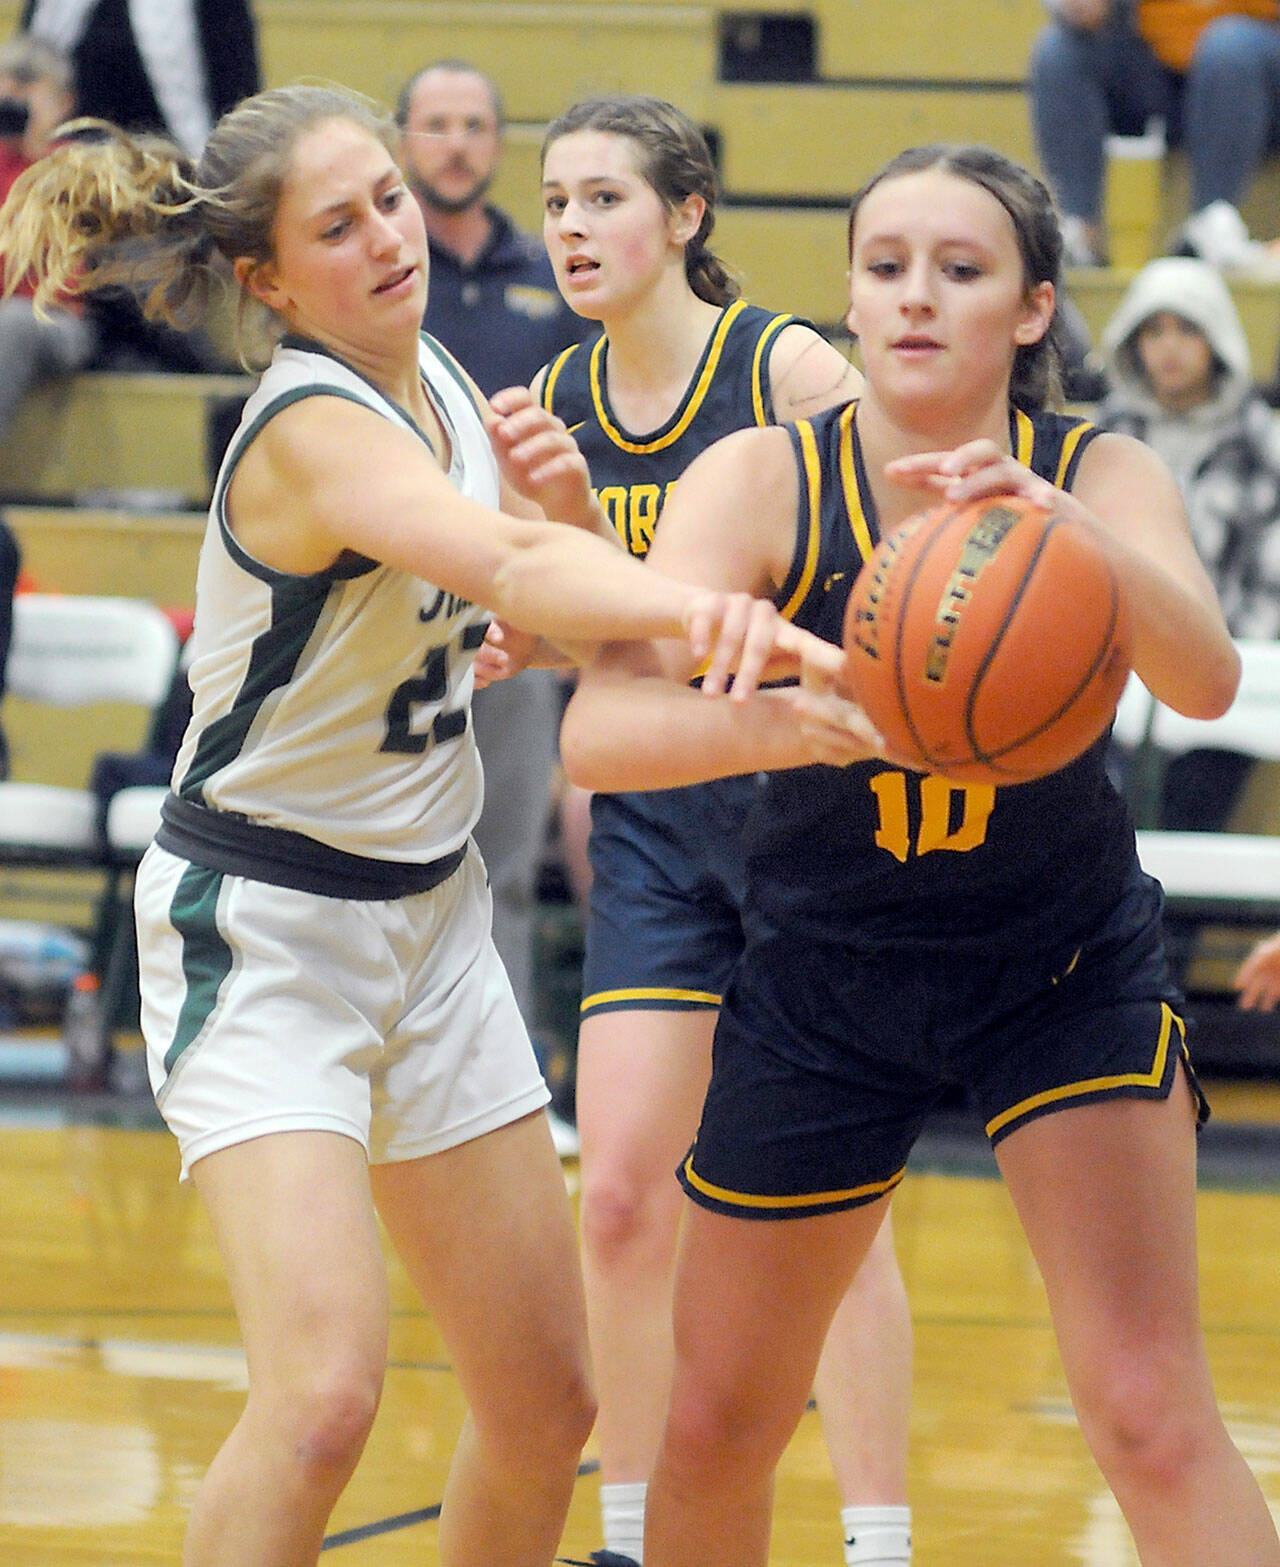 KEITH THORPE/PENINSULA DAILY NEWS Forks’ Avery Dilley, right, pulls down a rebound ahead of Port Angeles’ Becca Manson on Tuesday in Port Angeles.